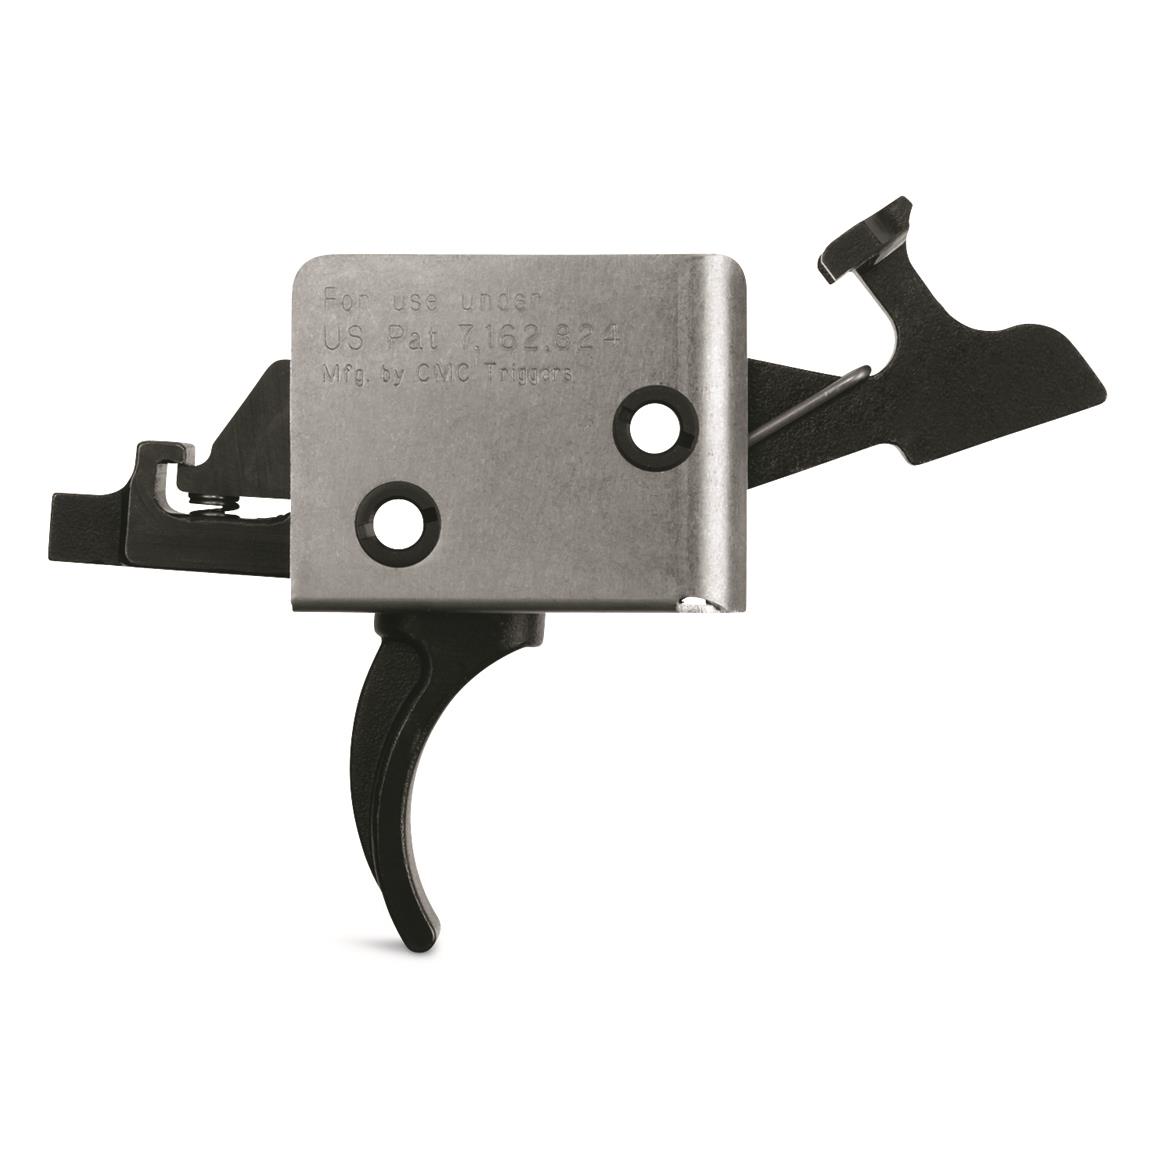 CMC Triggers AR-15 Drop-In Curved Trigger, 2-Stage Match, 2-lb./2-lb., .154" Small Pin,